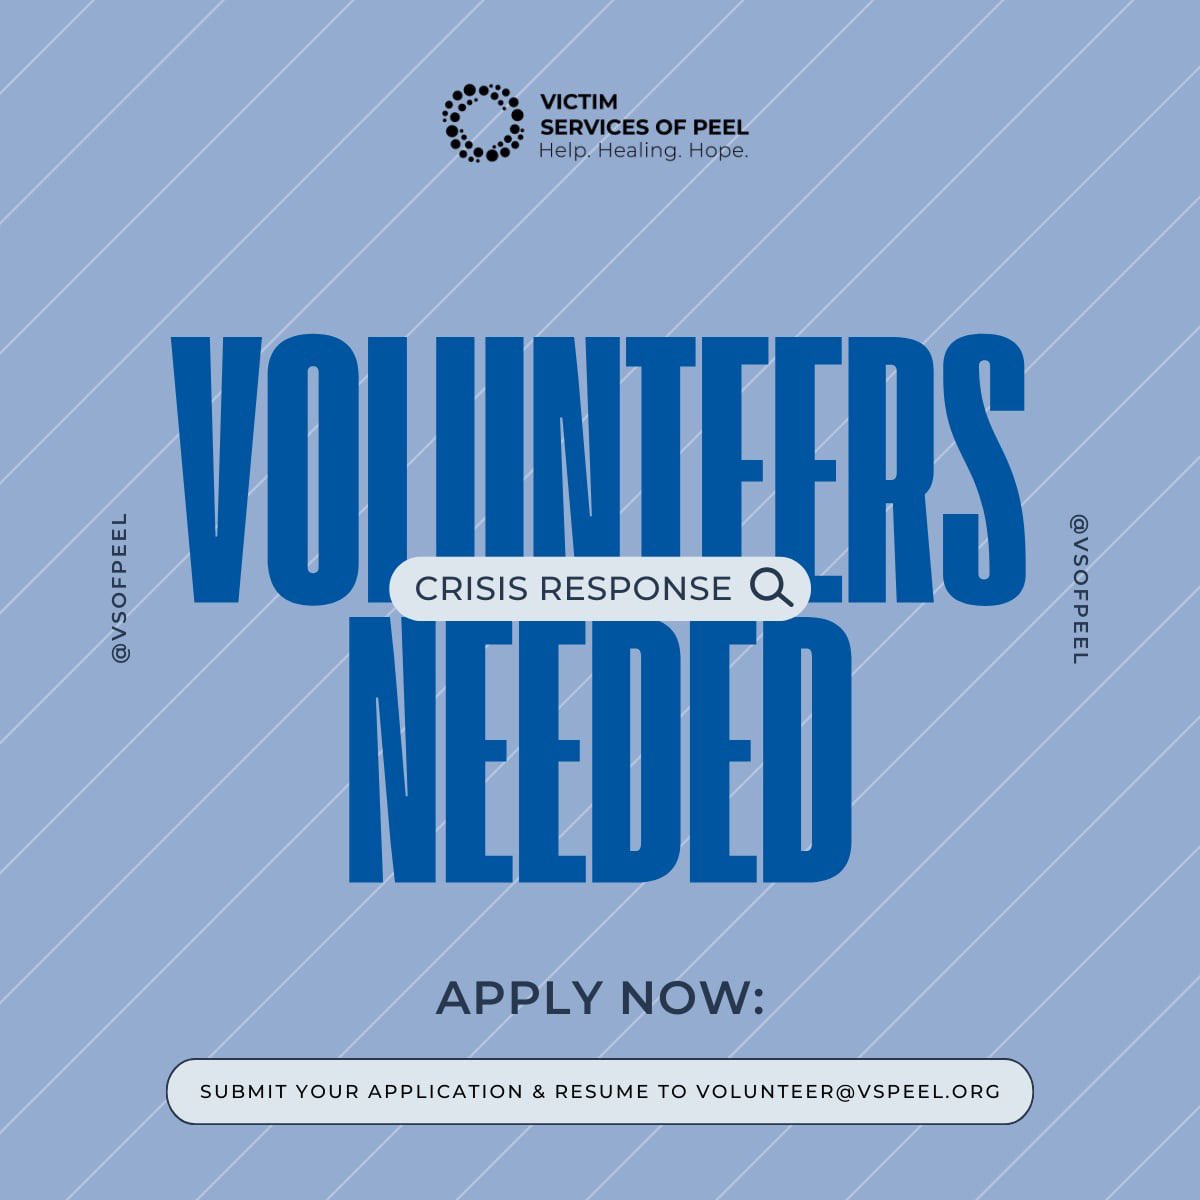 📢 We are currently recruiting volunteers for our Crisis Response Program! Join us in making a difference! For more information and to apply: vspeel.org/volunteerwithus Deadline to apply: we will stop recruitment when we have reached the desired number of applicants so apply now!